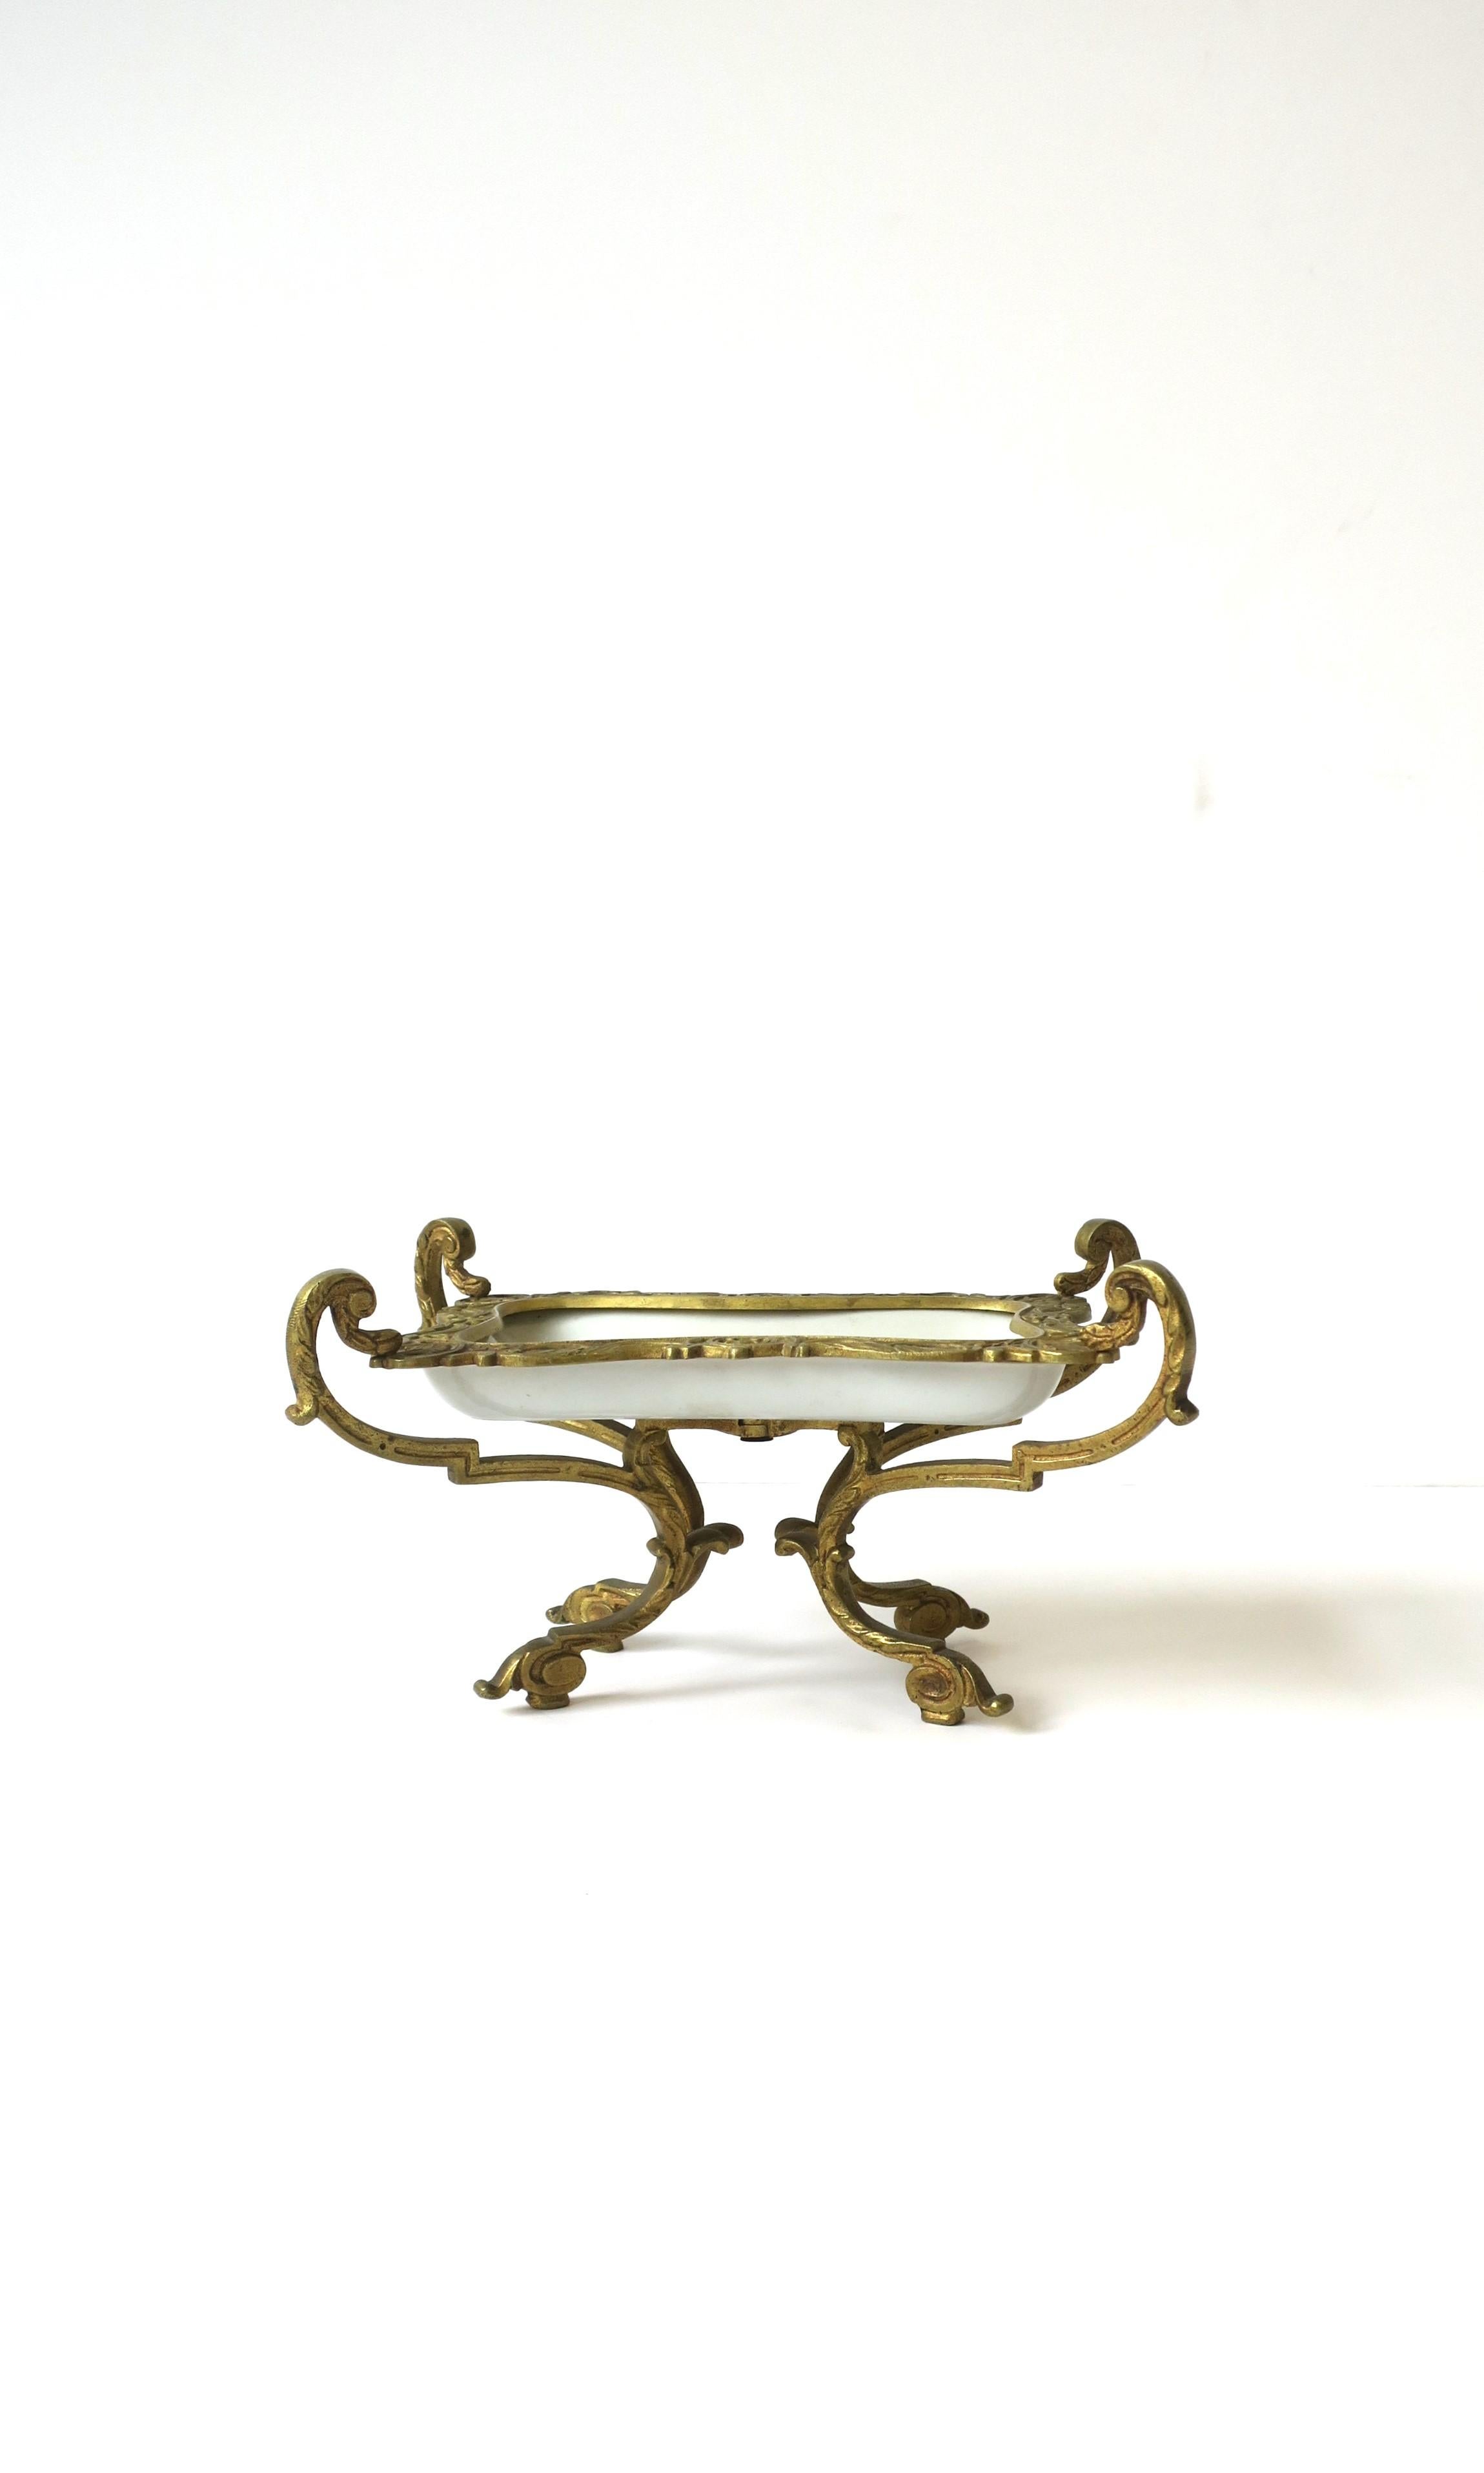 French Sevres Porcelain & Brass Ormolu Soap or Jewlery Dish Rococo, 18th Century For Sale 7